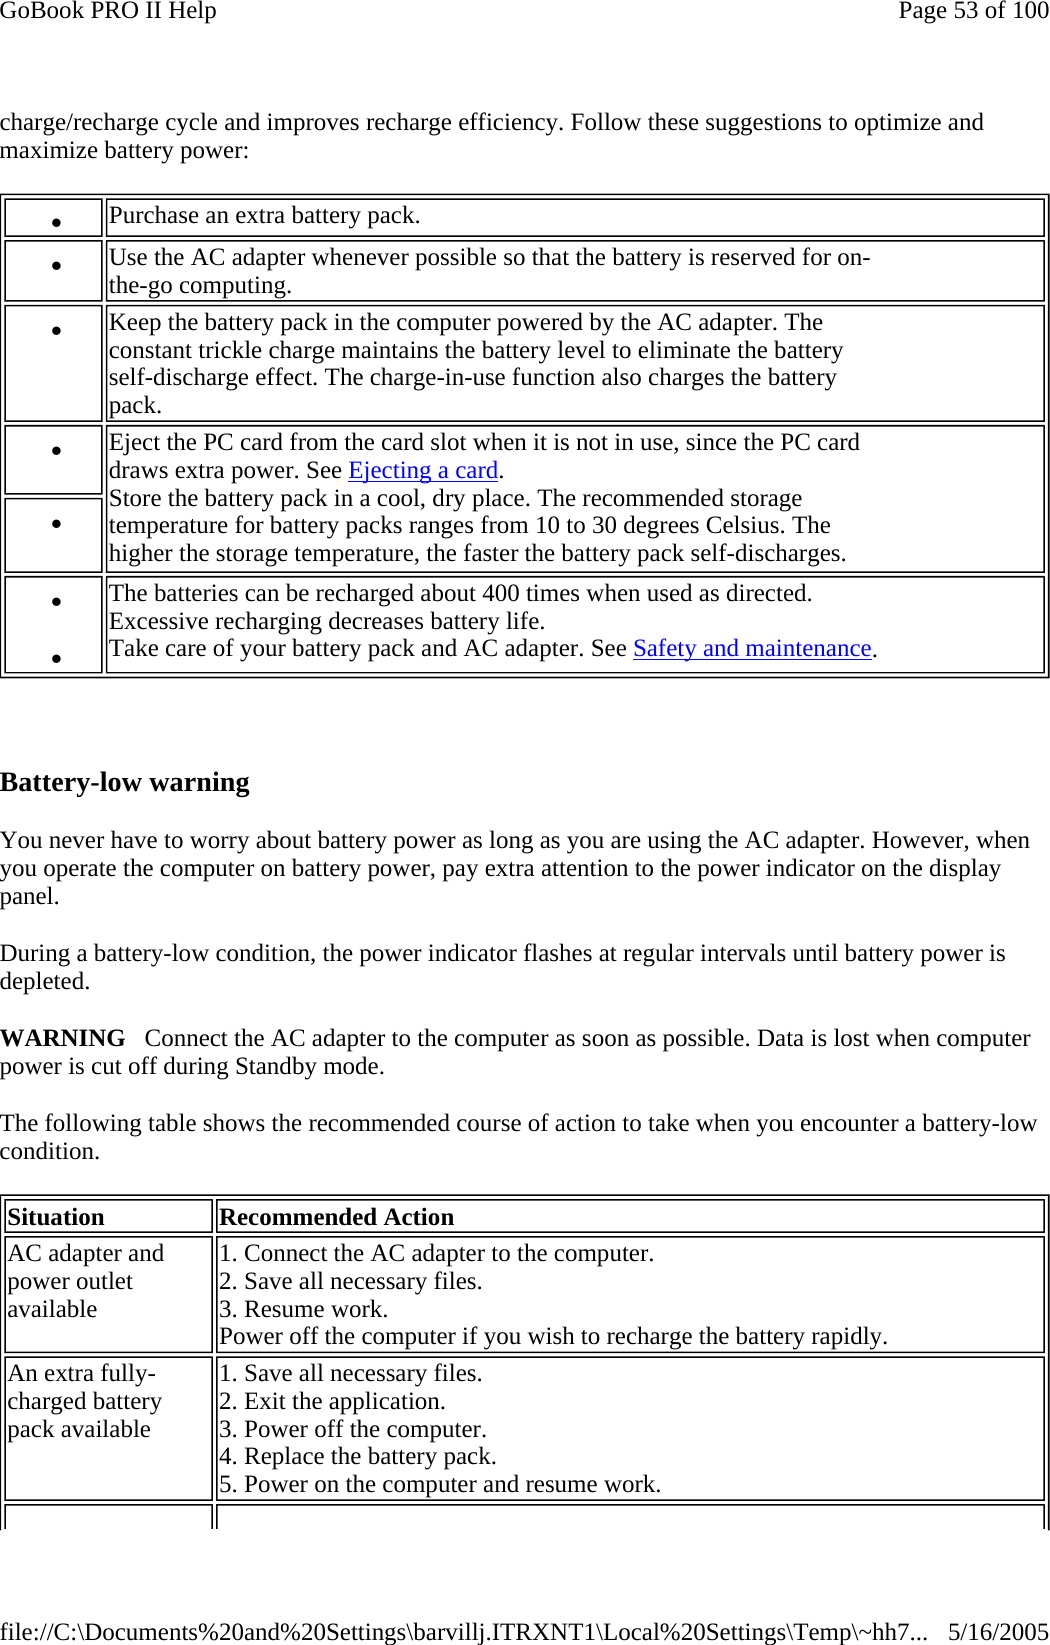 charge/recharge cycle and improves recharge efficiency. Follow these suggestions to optimize and maximize battery power:    Battery-low warning You never have to worry about battery power as long as you are using the AC adapter. However, when you operate the computer on battery power, pay extra attention to the power indicator on the display panel.  During a battery-low condition, the power indicator flashes at regular intervals until battery power is depleted. WARNING   Connect the AC adapter to the computer as soon as possible. Data is lost when computer power is cut off during Standby mode. The following table shows the recommended course of action to take when you encounter a battery-low condition. z    Purchase an extra battery pack. z    Use the AC adapter whenever possible so that the battery is reserved for on- the-go computing. z    Keep the battery pack in the computer powered by the AC adapter. The  constant trickle charge maintains the battery level to eliminate the battery  self-discharge effect. The charge-in-use function also charges the battery  pack. z    Eject the PC card from the card slot when it is not in use, since the PC card  draws extra power. See Ejecting a card. Store the battery pack in a cool, dry place. The recommended storage  temperature for battery packs ranges from 10 to 30 degrees Celsius. The  higher the storage temperature, the faster the battery pack self-discharges.  z   z   z   The batteries can be recharged about 400 times when used as directed.  Excessive recharging decreases battery life. Take care of your battery pack and AC adapter. See Safety and maintenance. Situation  Recommended Action AC adapter and  power outlet  available 1. Connect the AC adapter to the computer. 2. Save all necessary files. 3. Resume work. Power off the computer if you wish to recharge the battery rapidly. An extra fully- charged battery  pack available 1. Save all necessary files. 2. Exit the application. 3. Power off the computer. 4. Replace the battery pack. 5. Power on the computer and resume work. Page 53 of 100GoBook PRO II Help5/16/2005file://C:\Documents%20and%20Settings\barvillj.ITRXNT1\Local%20Settings\Temp\~hh7...